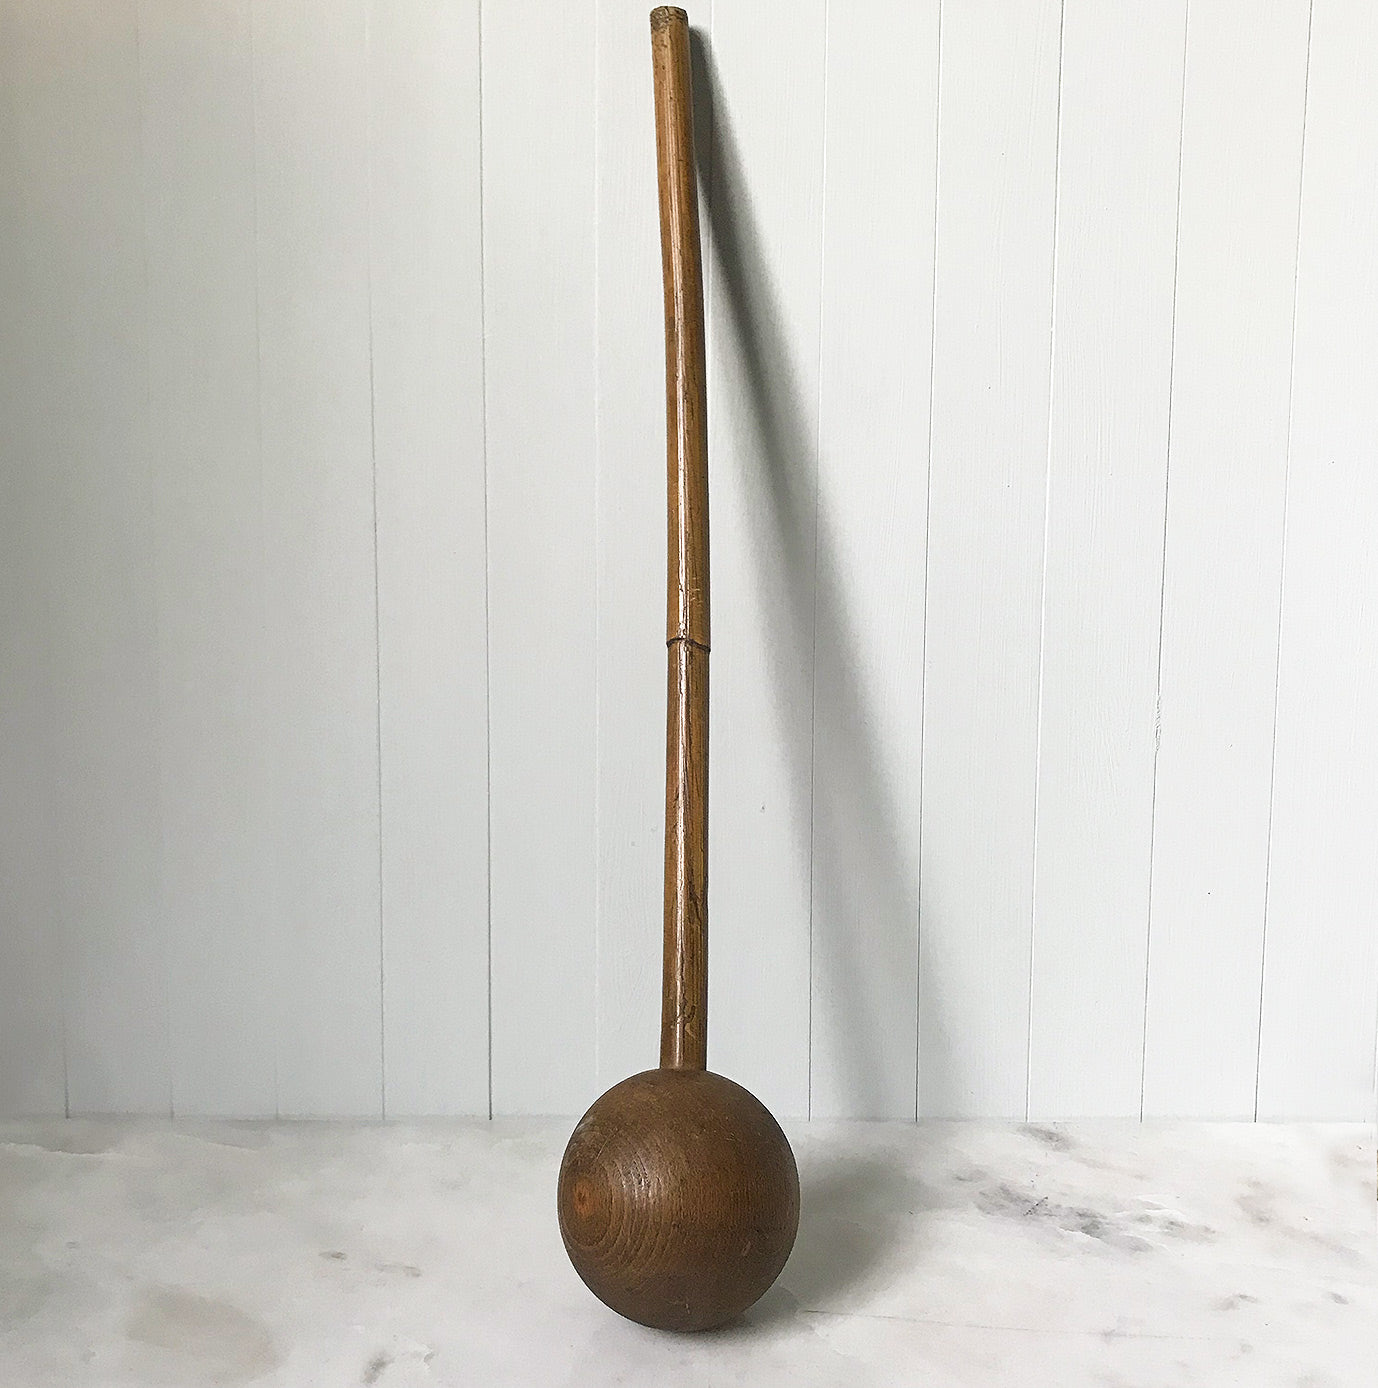 An extremely tactile antique club with a bamboo handle and spherical oak head - SHOP NOW - www.intovintage.co.uk